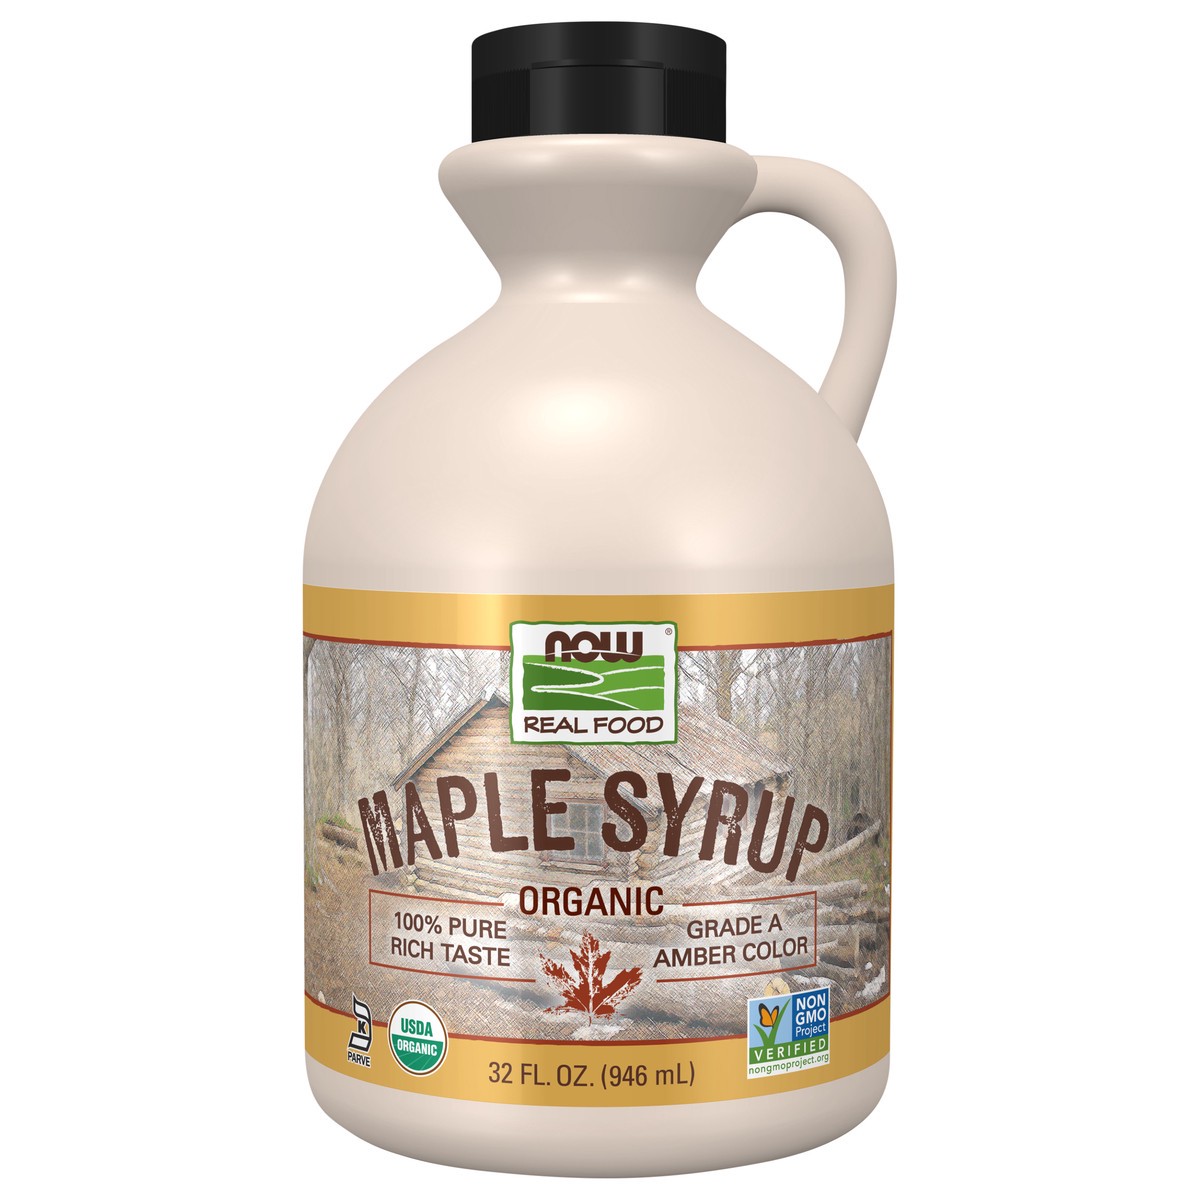 slide 1 of 4, NOW Real Food Maple Syrup, Organic Grade A Amber Color - 32 oz., 32 fl oz